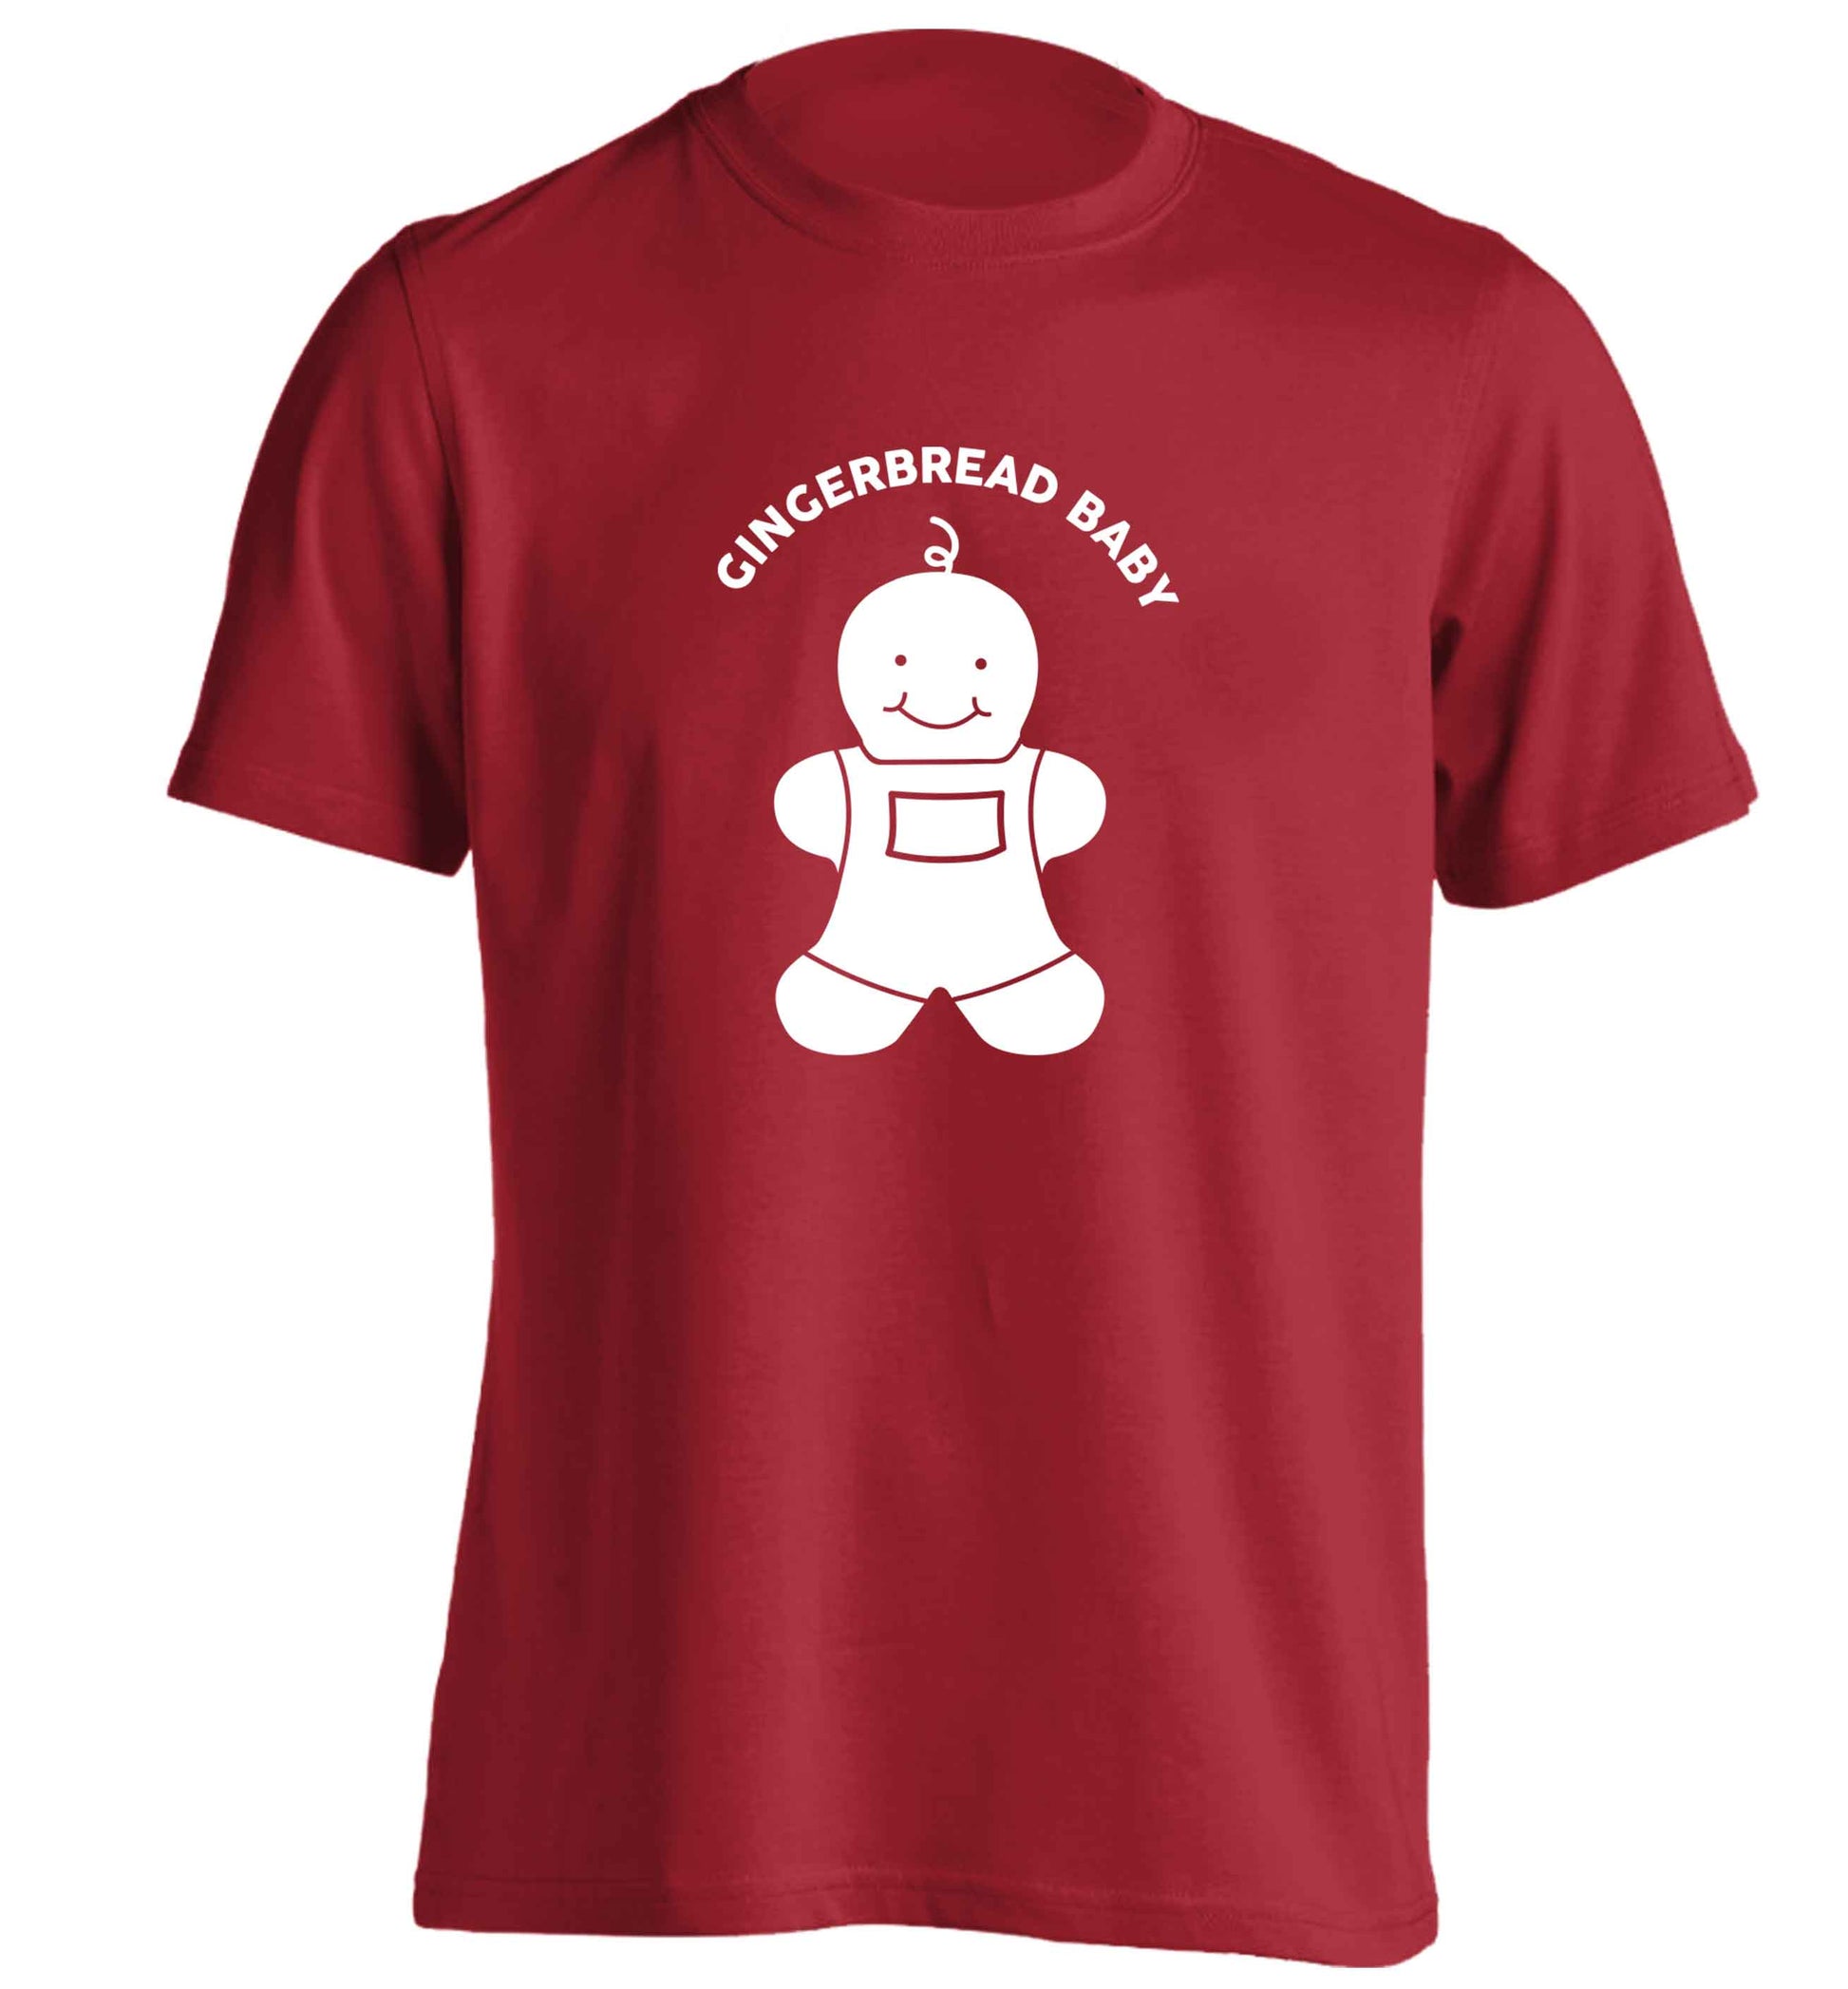 Gingerbread baby adults unisex red Tshirt 2XL